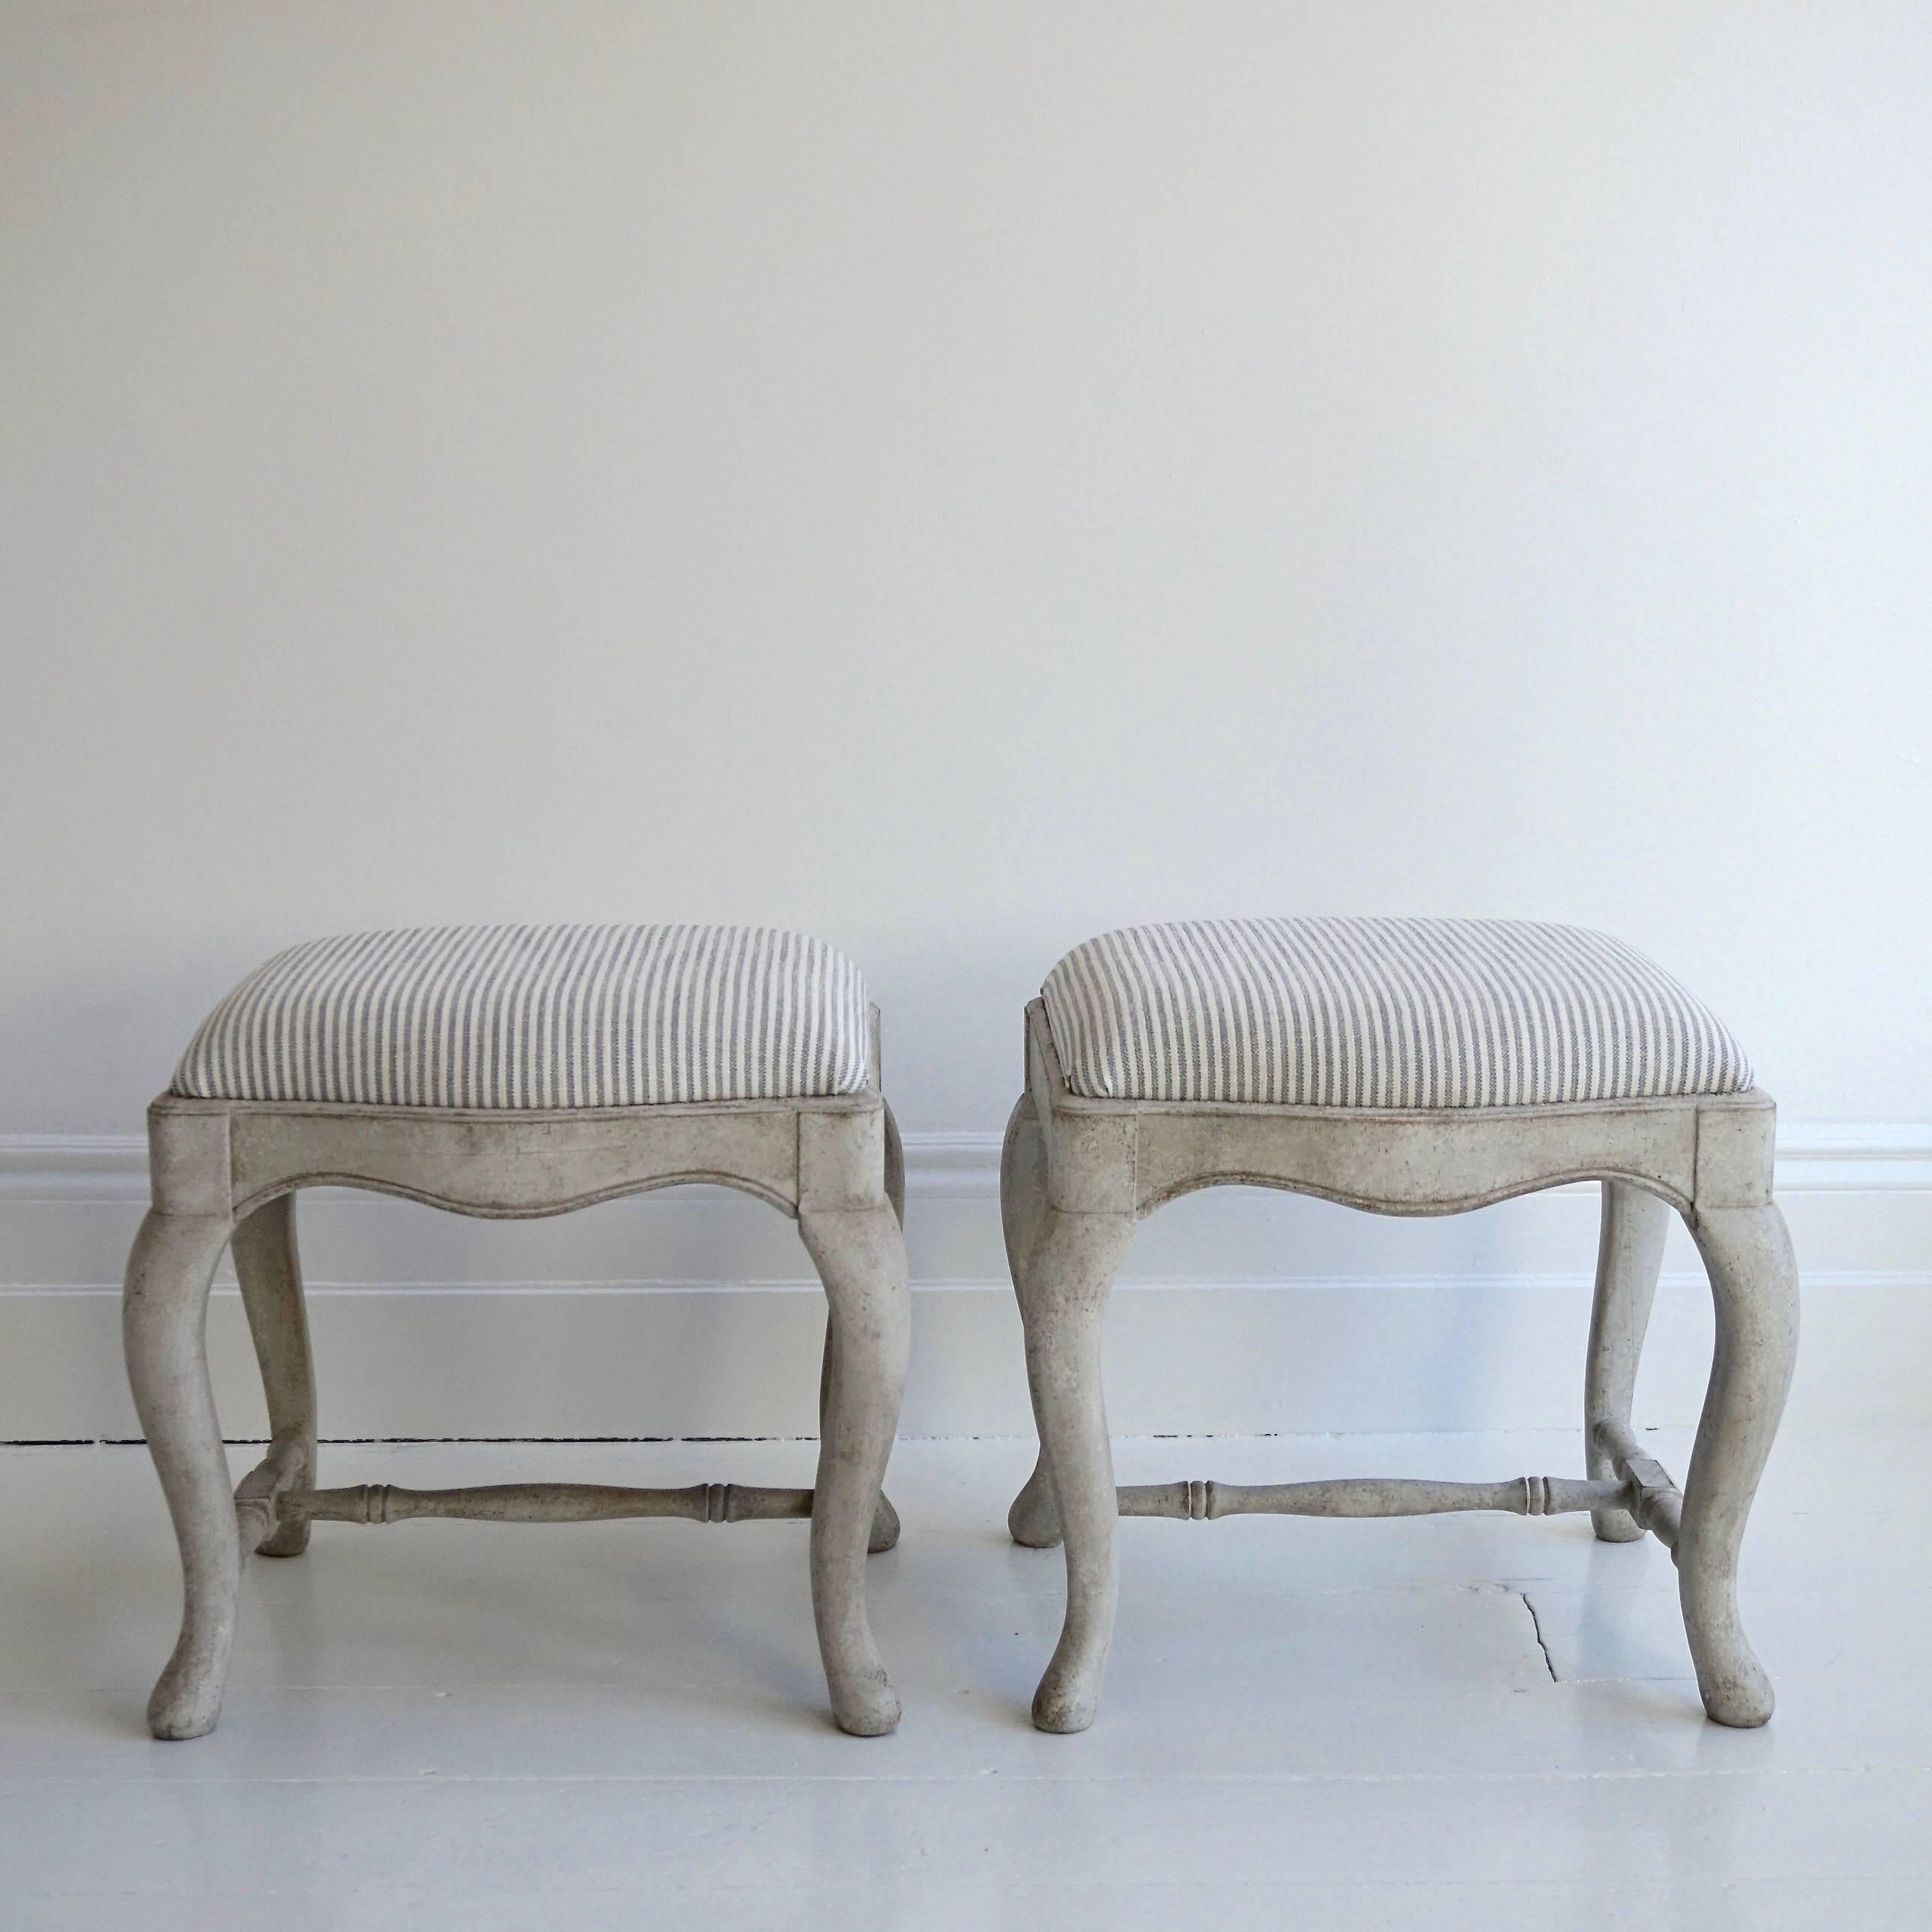 Hand-Carved Pair of Swedish Baroque Tabouret Stools